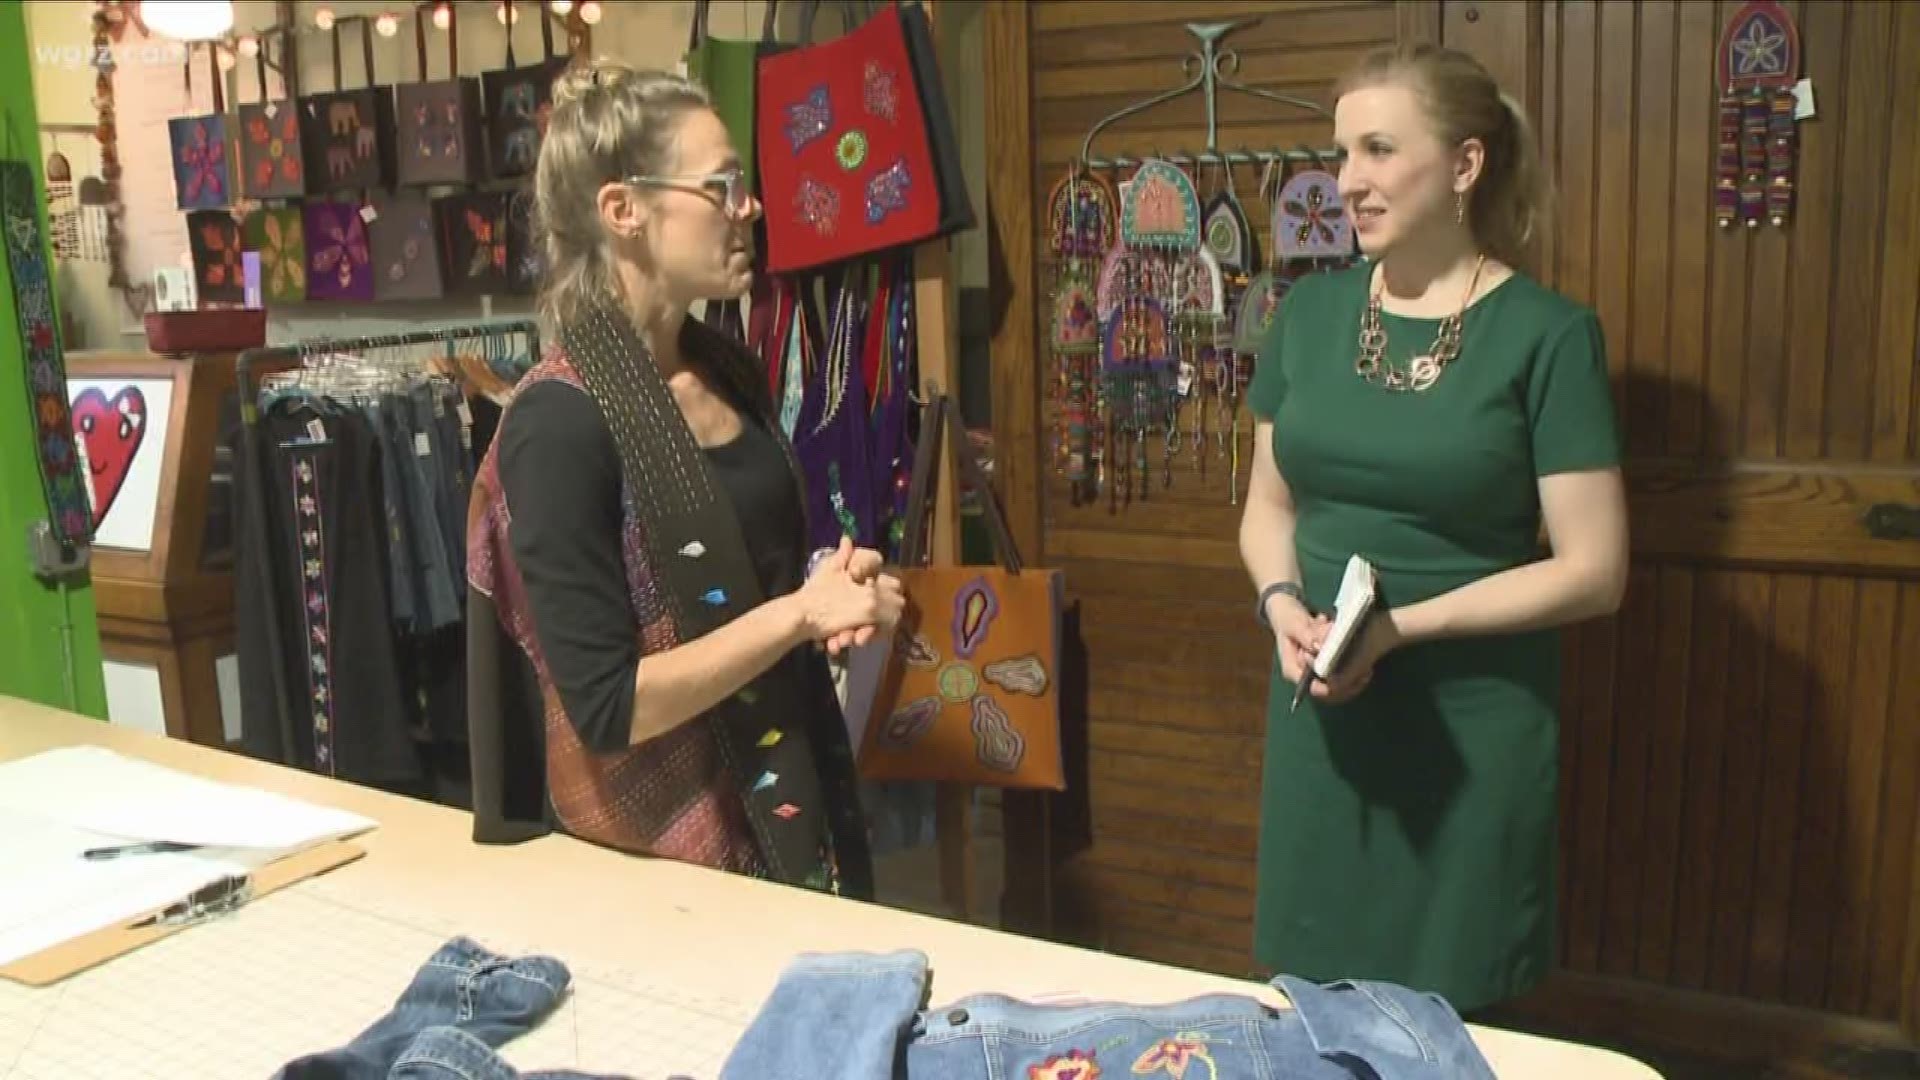 Dawne Hoeg started Stitch Buffalo five years ago as a small project to connect with the women in the neighborhoods surrounding Buff State...